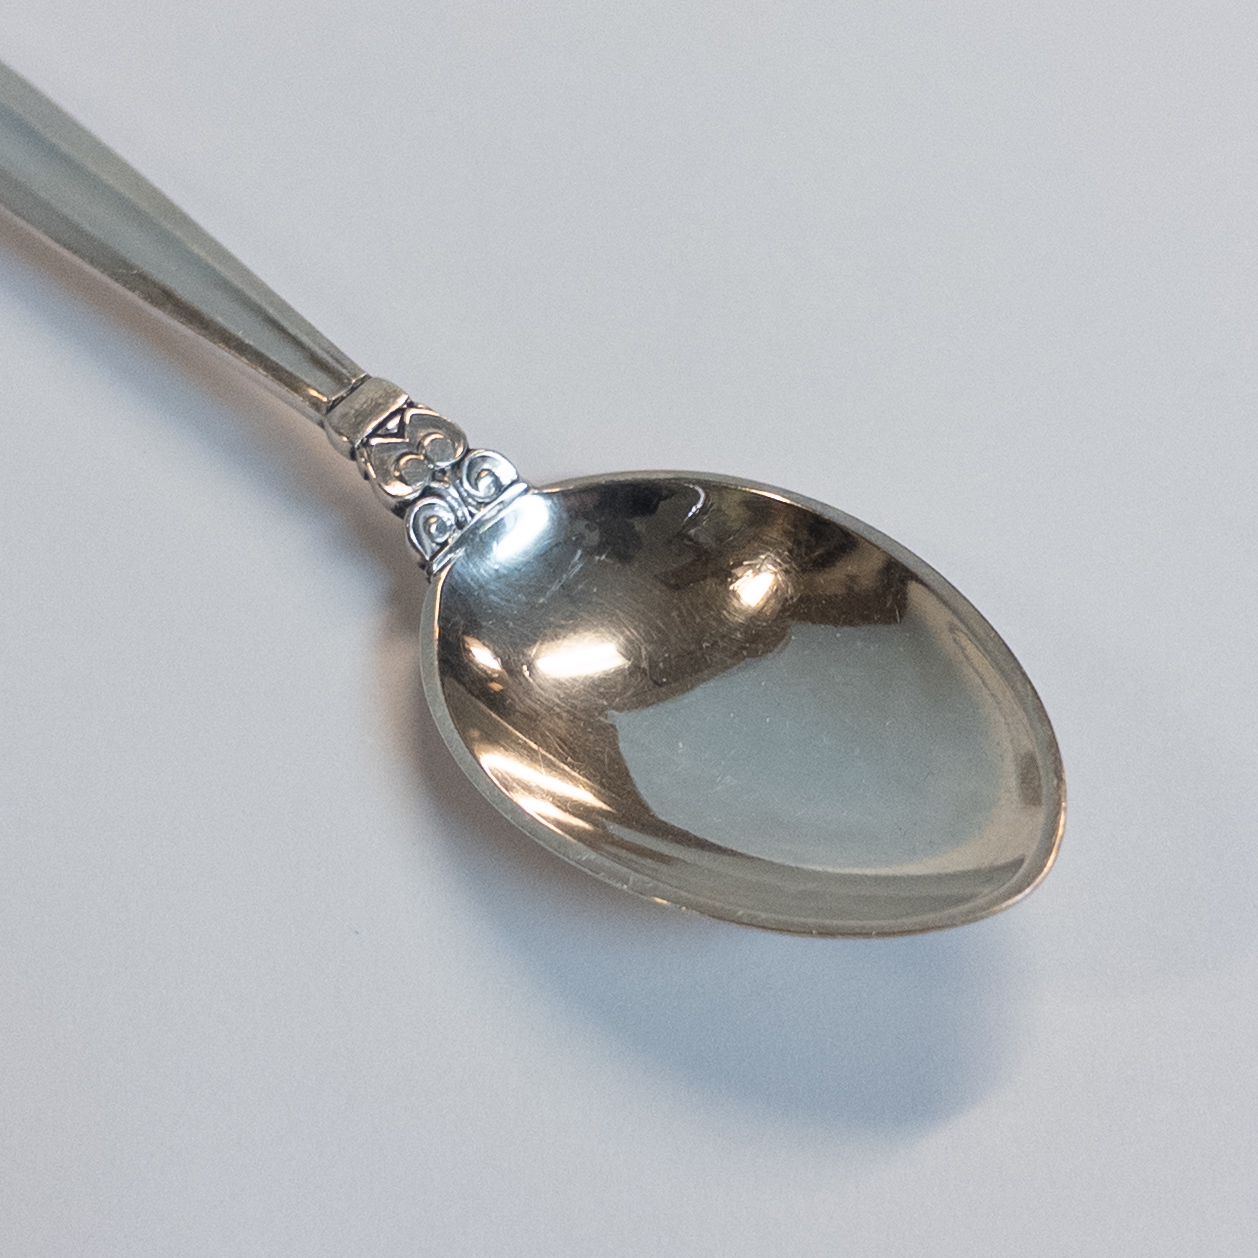 Georg Jensen Sterling Silver Set of 12 Condiment Spoons